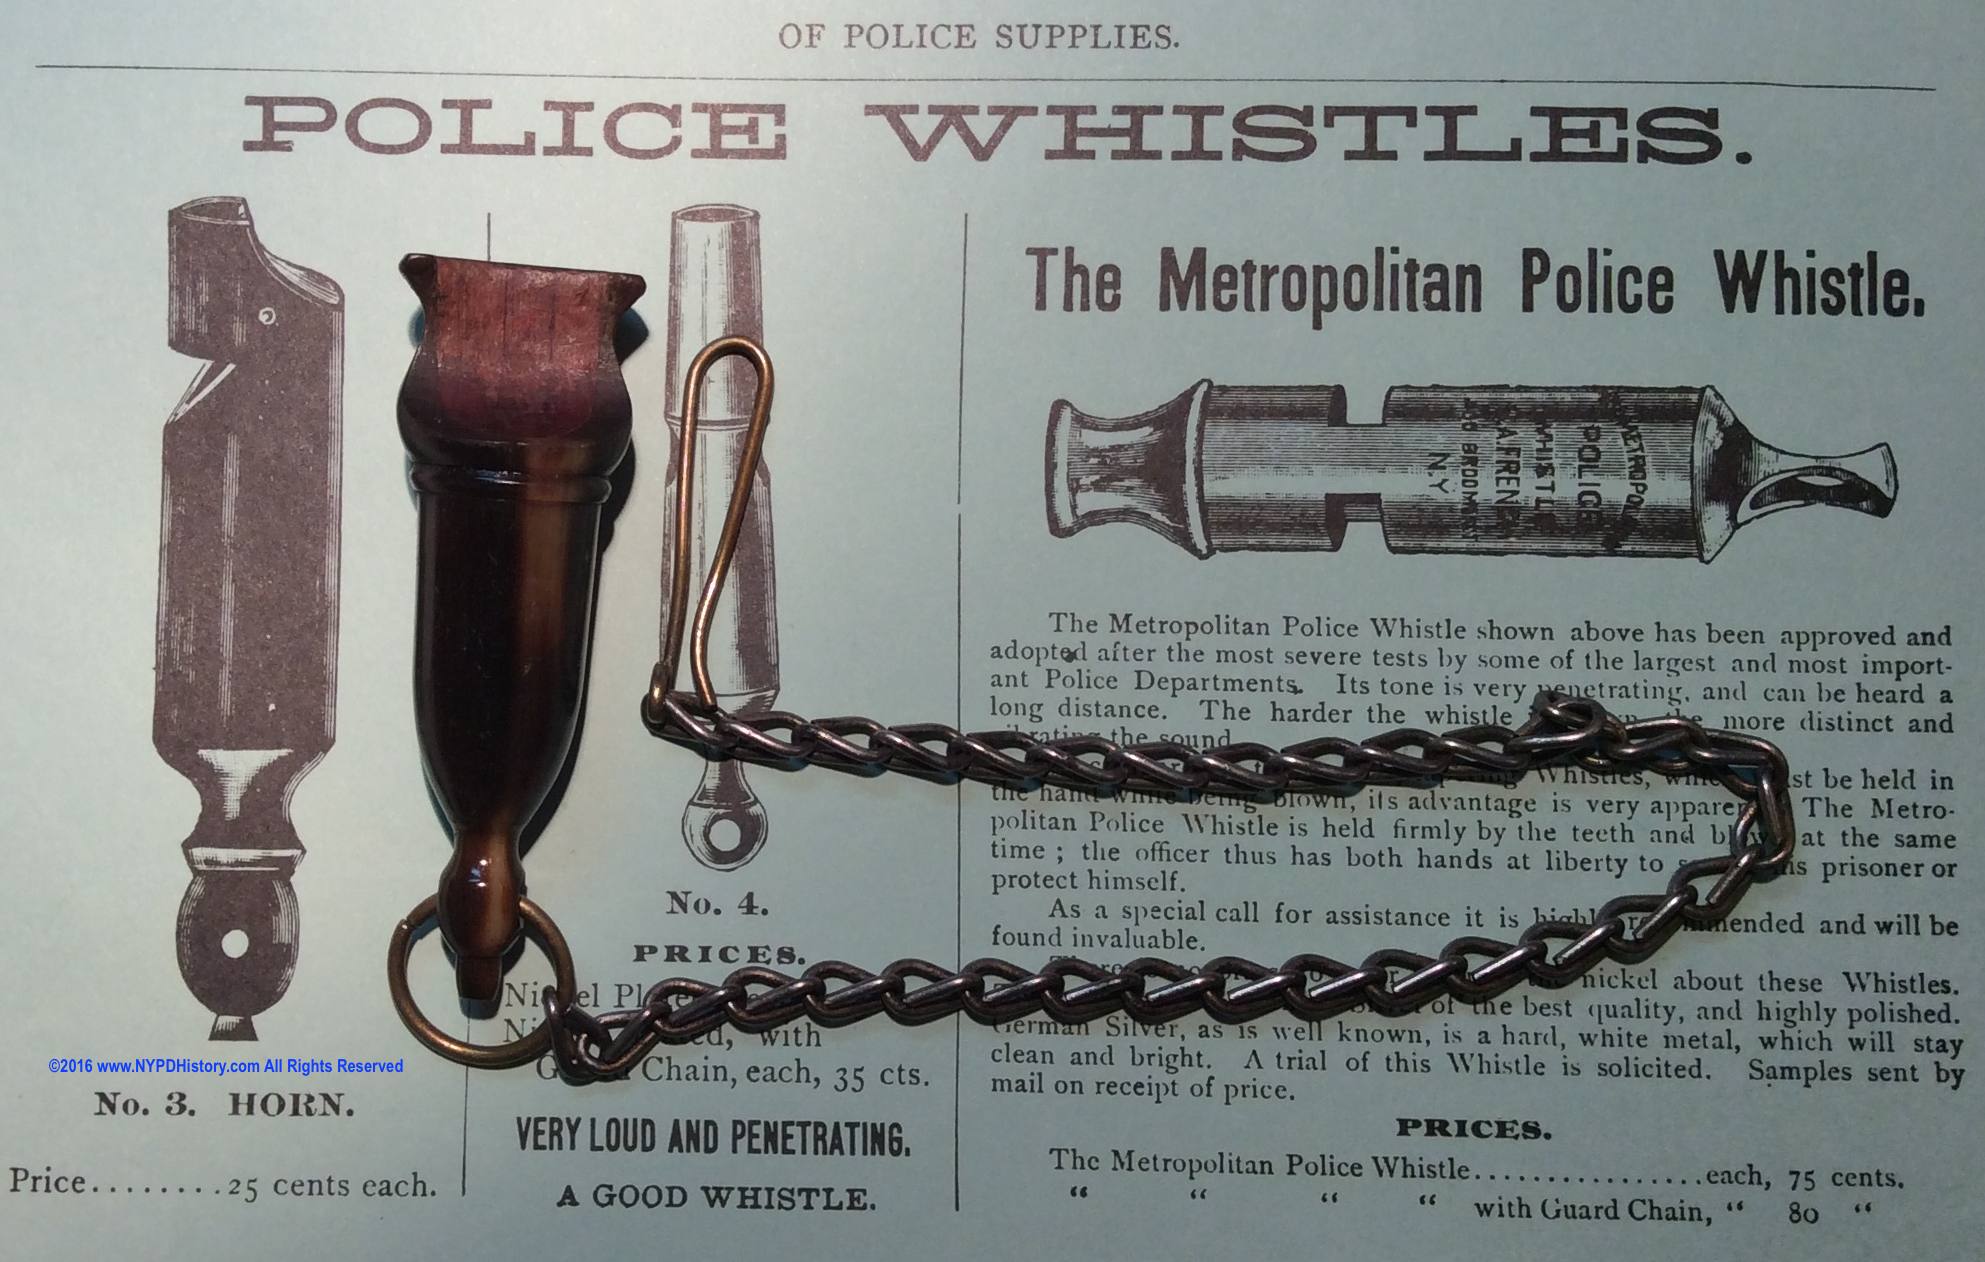 1897 S.A. French & Co. Police Catalog